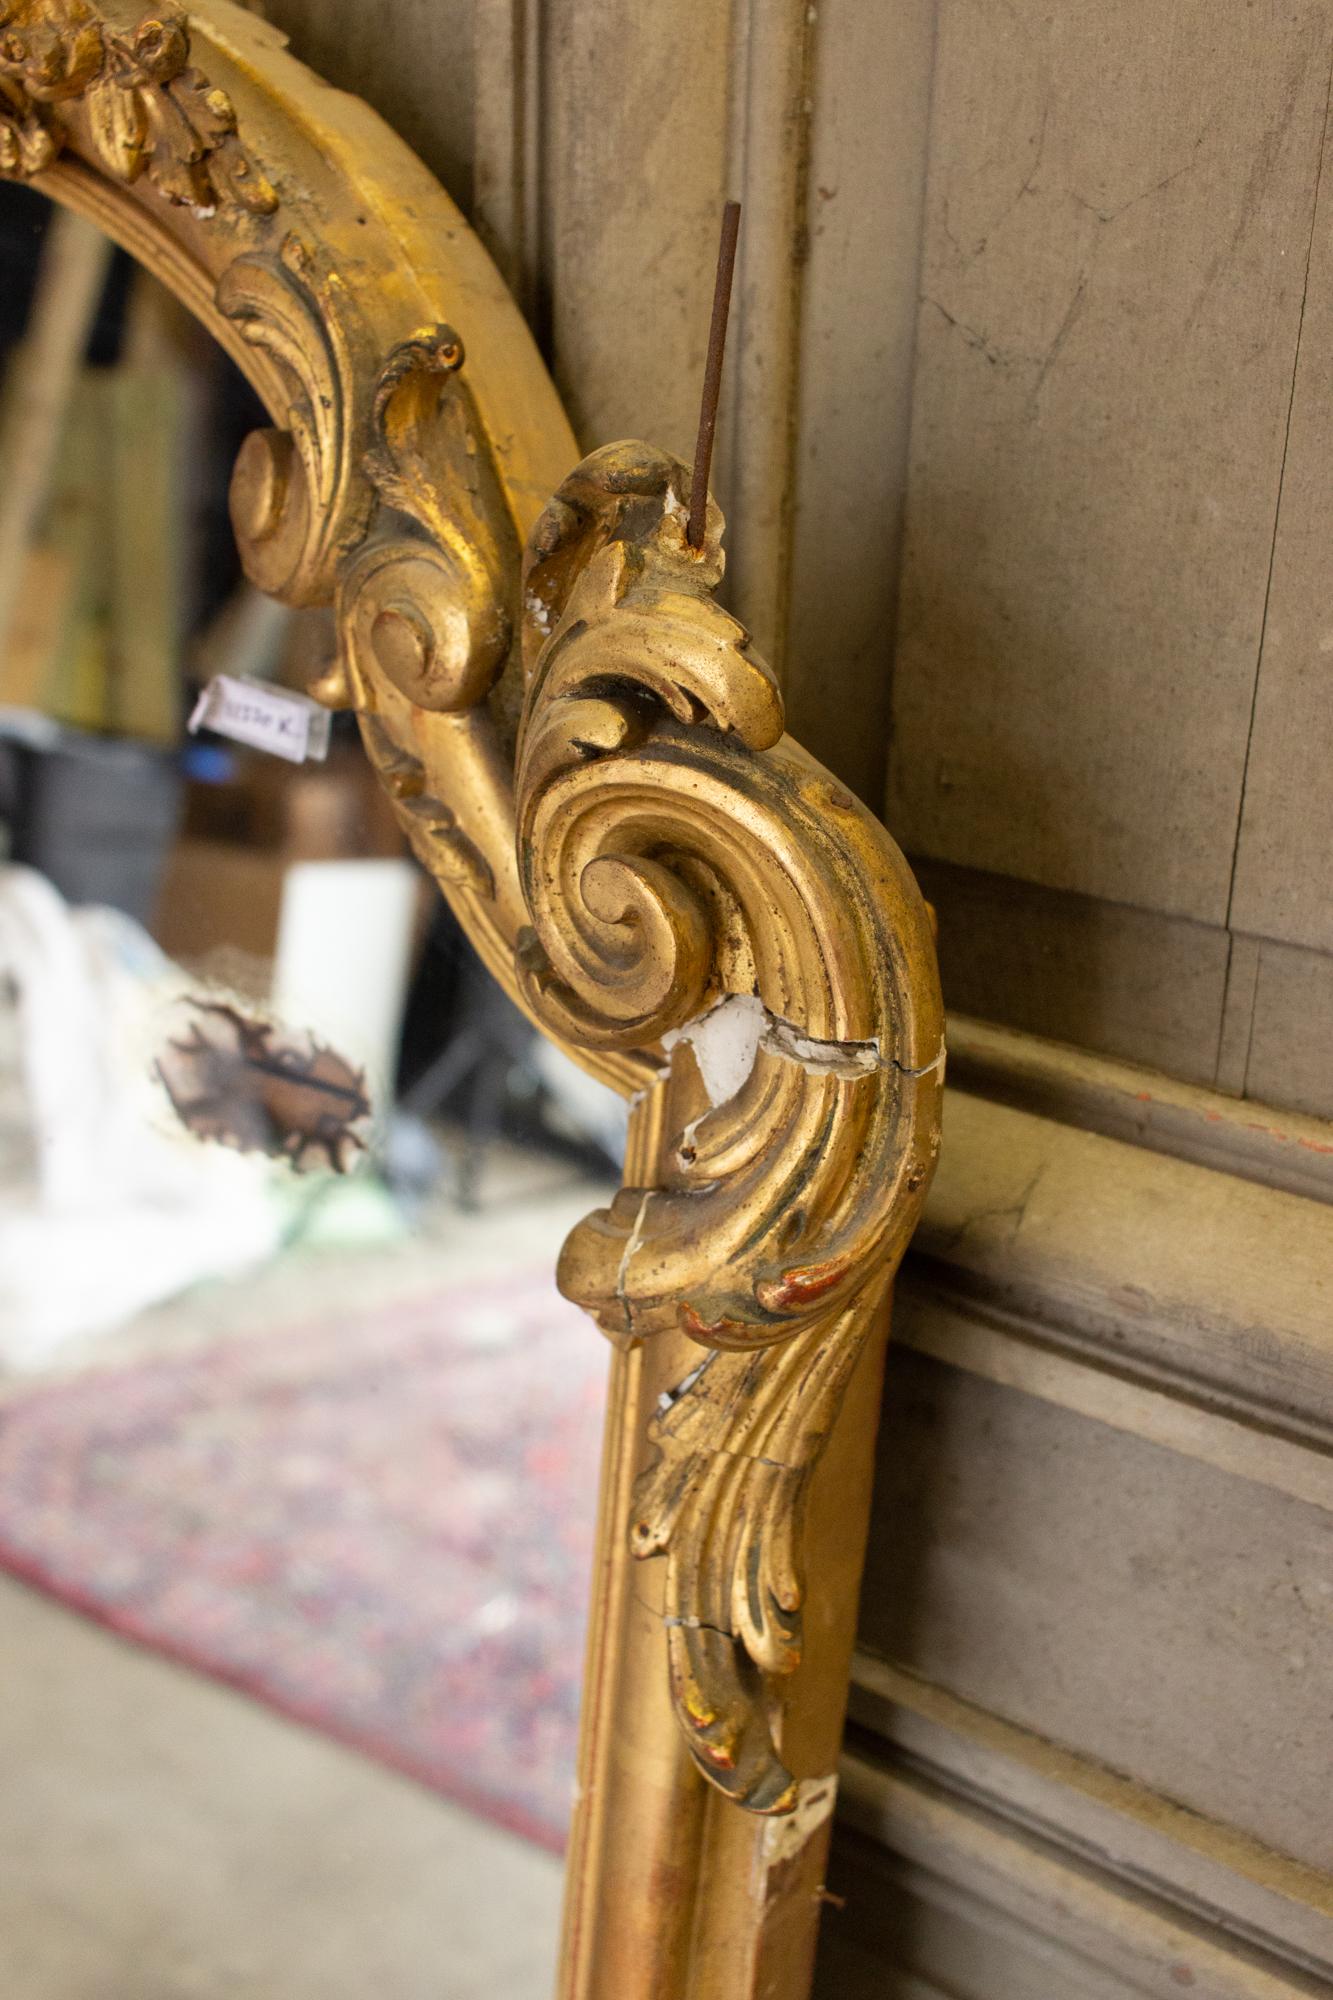 Plaster Antique Gilt Full-Length Mirror with Decorative Carvings and Shell Cartouche